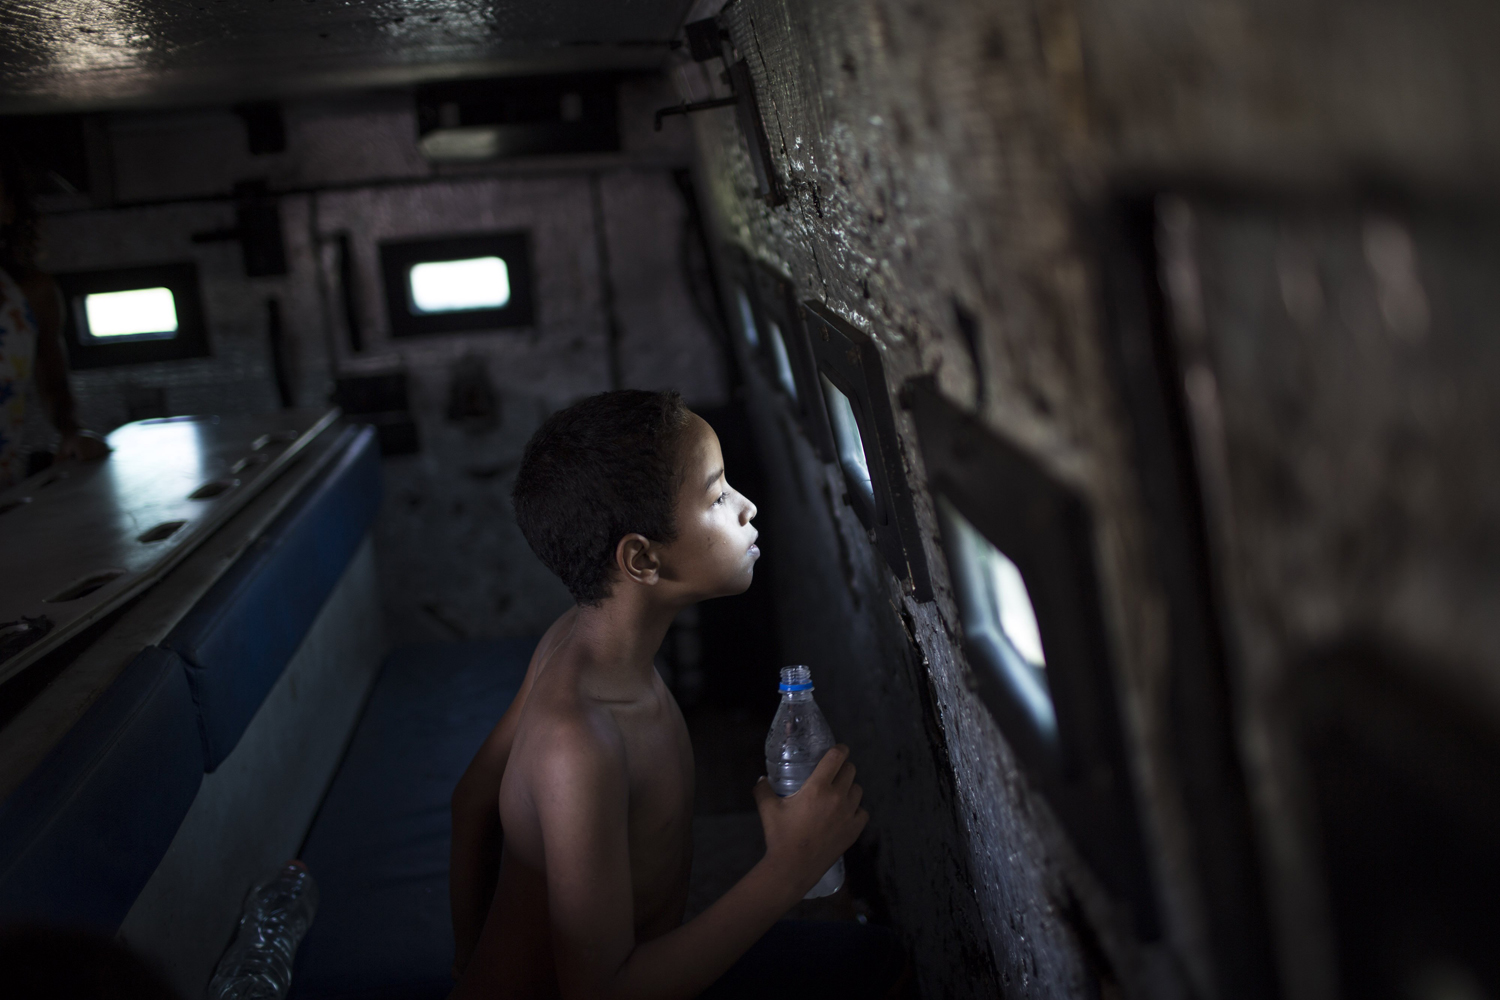 Mar. 30, 2014. A young resident looks through a small bullet proof window as he sits inside a police armored vehicle after a police operation to occupy the Vila Pinheiro, part of the Mare slum complex in Rio de Janeiro, Brazil.